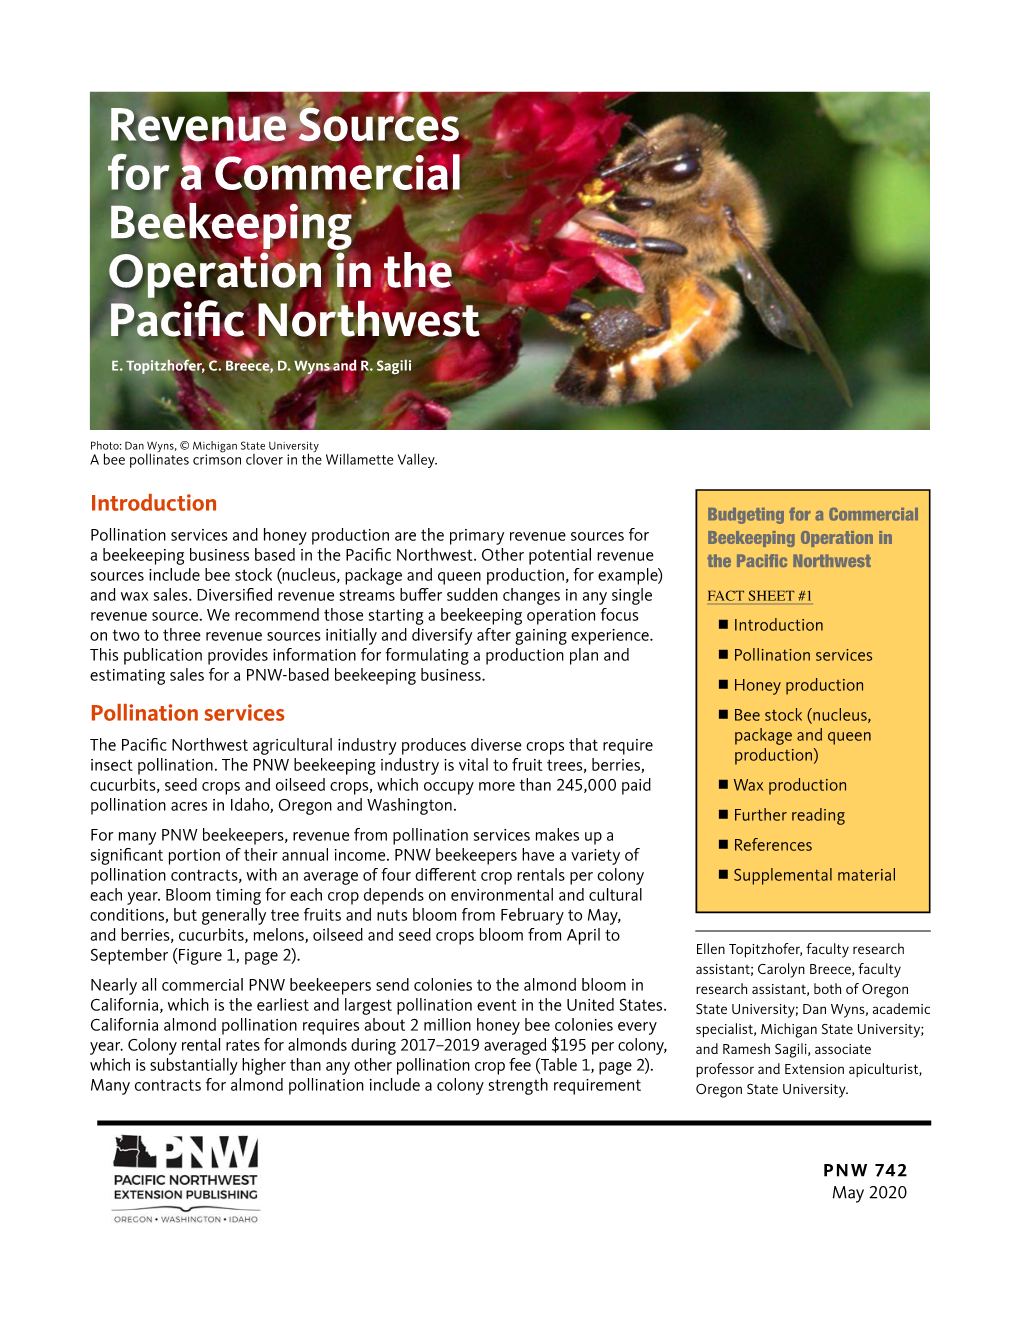 Revenue Sources for a Commercial Beekeeping Operation in the Pacific Northwest E